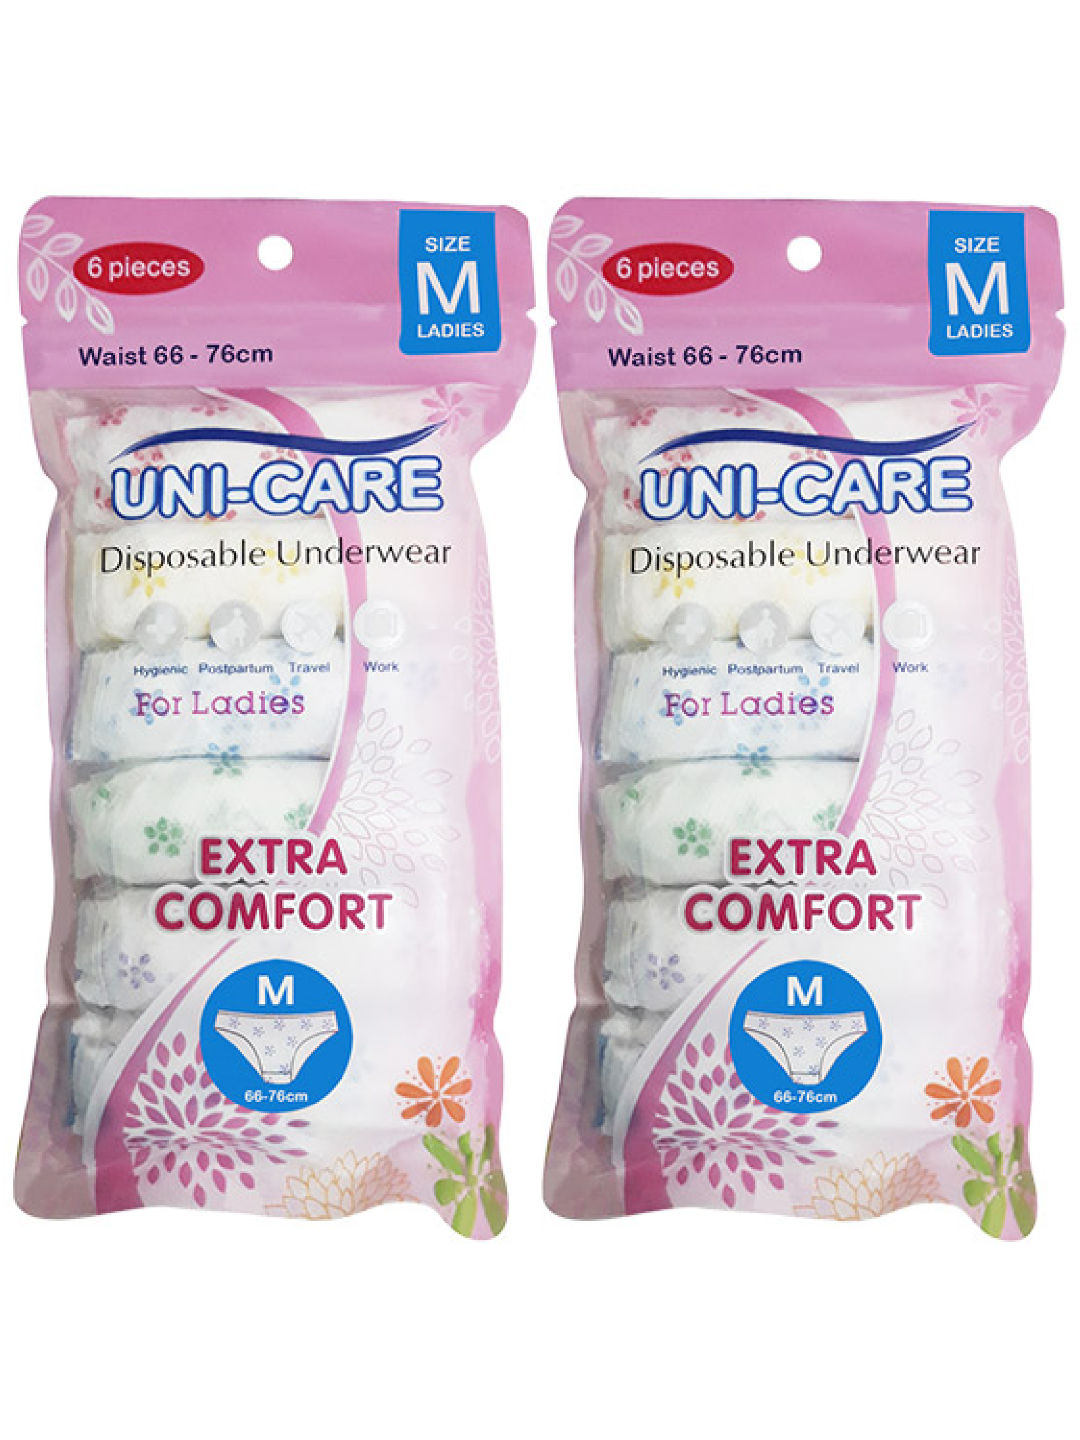 Uni-care Disposable Underwear for Women 66-76cm (6 sheets) - Pack of 2 (No Color- Image 1)